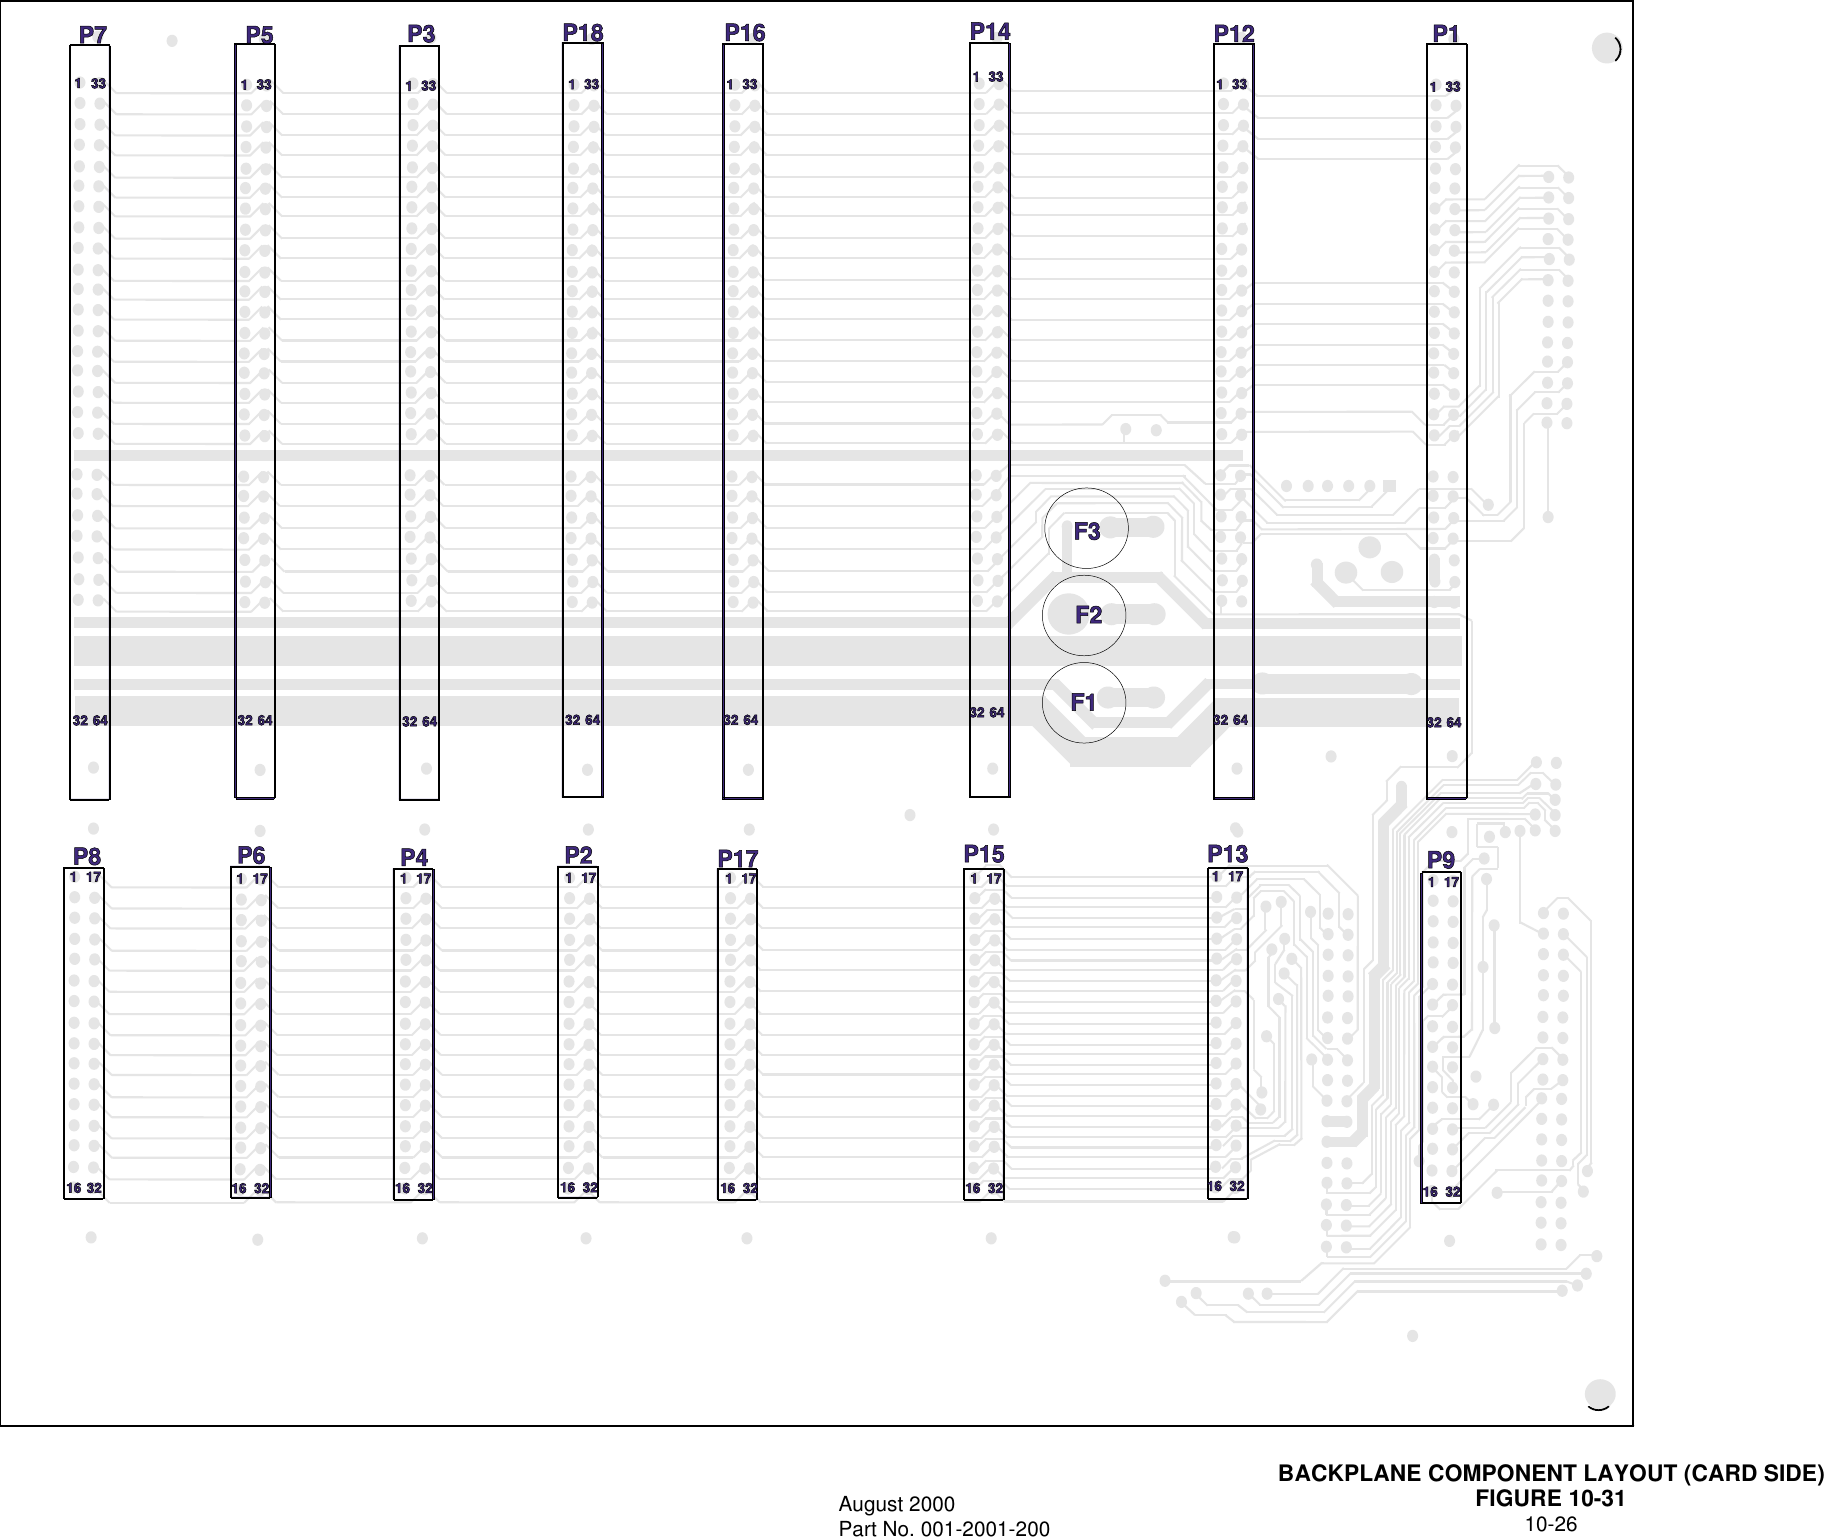 BACKPLANE COMPONENT LAYOUT (CARD SIDE)FIGURE 10-3110-26August 2000Part No. 001-2001-200F1F2F3P9P13P15P17P2P4P6P8P7 P5 P3 P18 P16 P14 P12 P113332 641 17321613332 641 1732161 1732161 1732161 1732161 1732161 1732161 17321613332 6413332 6413332 6413332 6413332 6413332 64